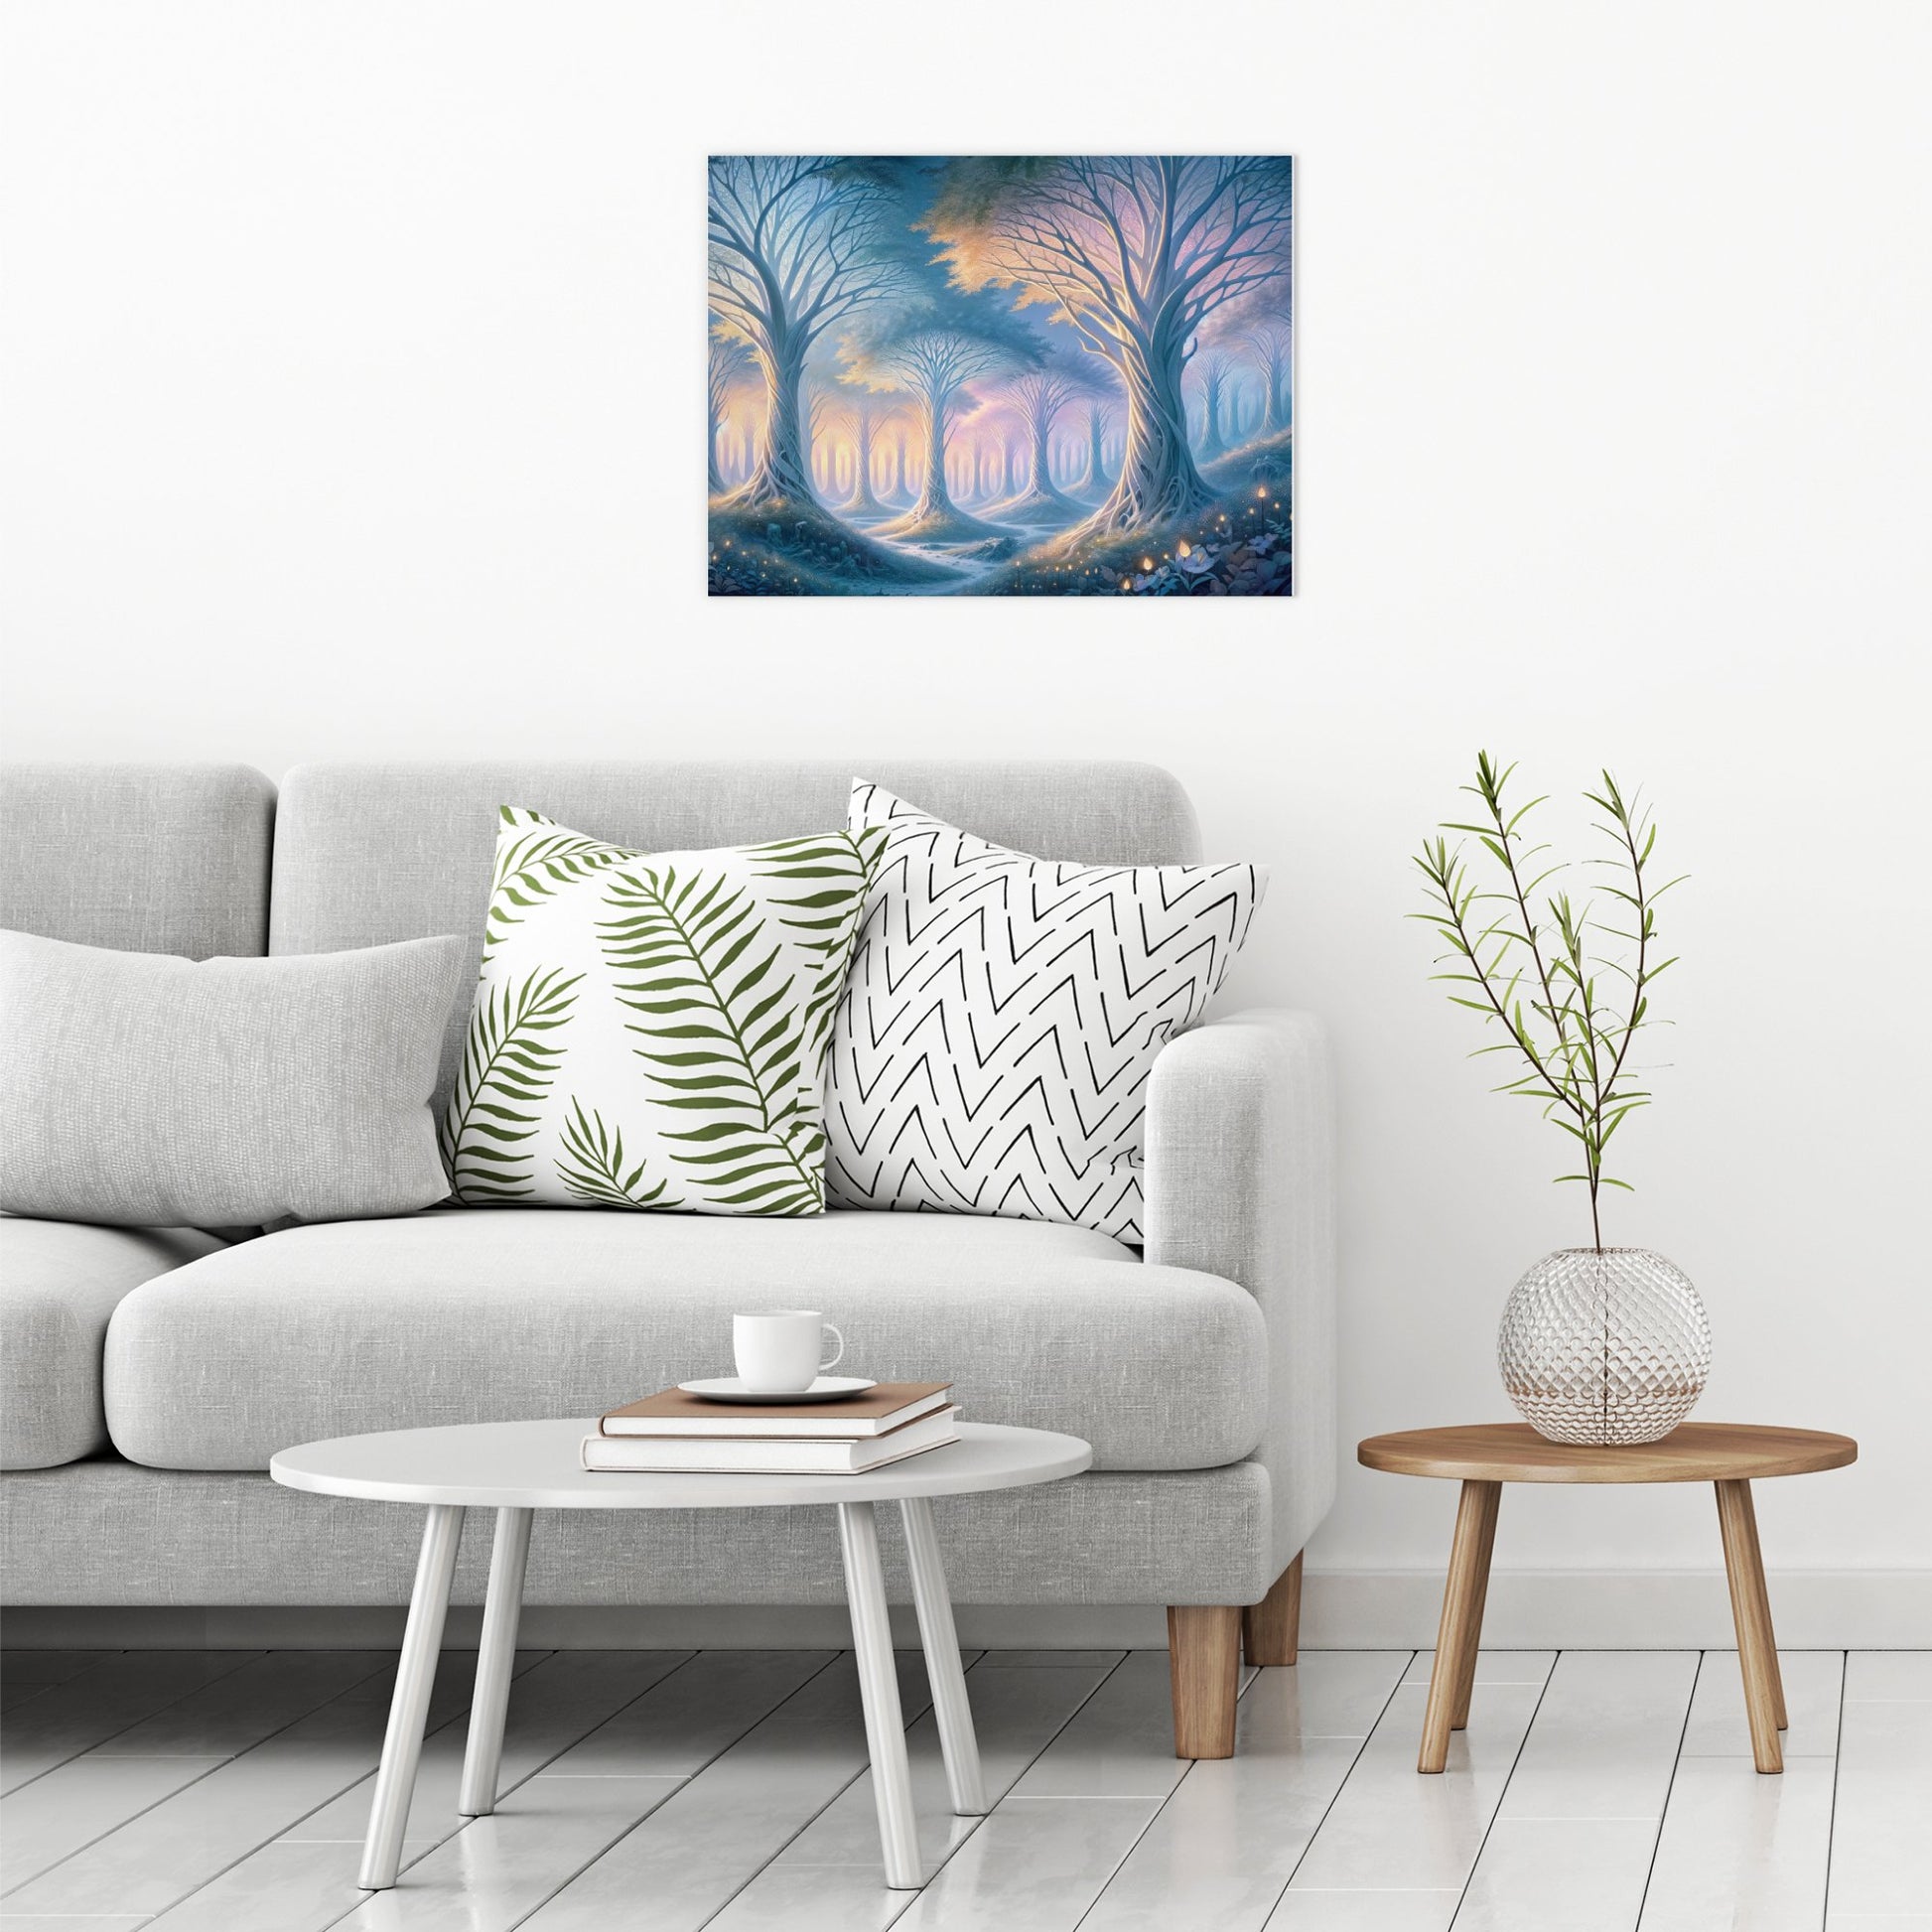 A contemporary modern room view showing a large size metal art poster display plate with printed design of a Mystical Forest